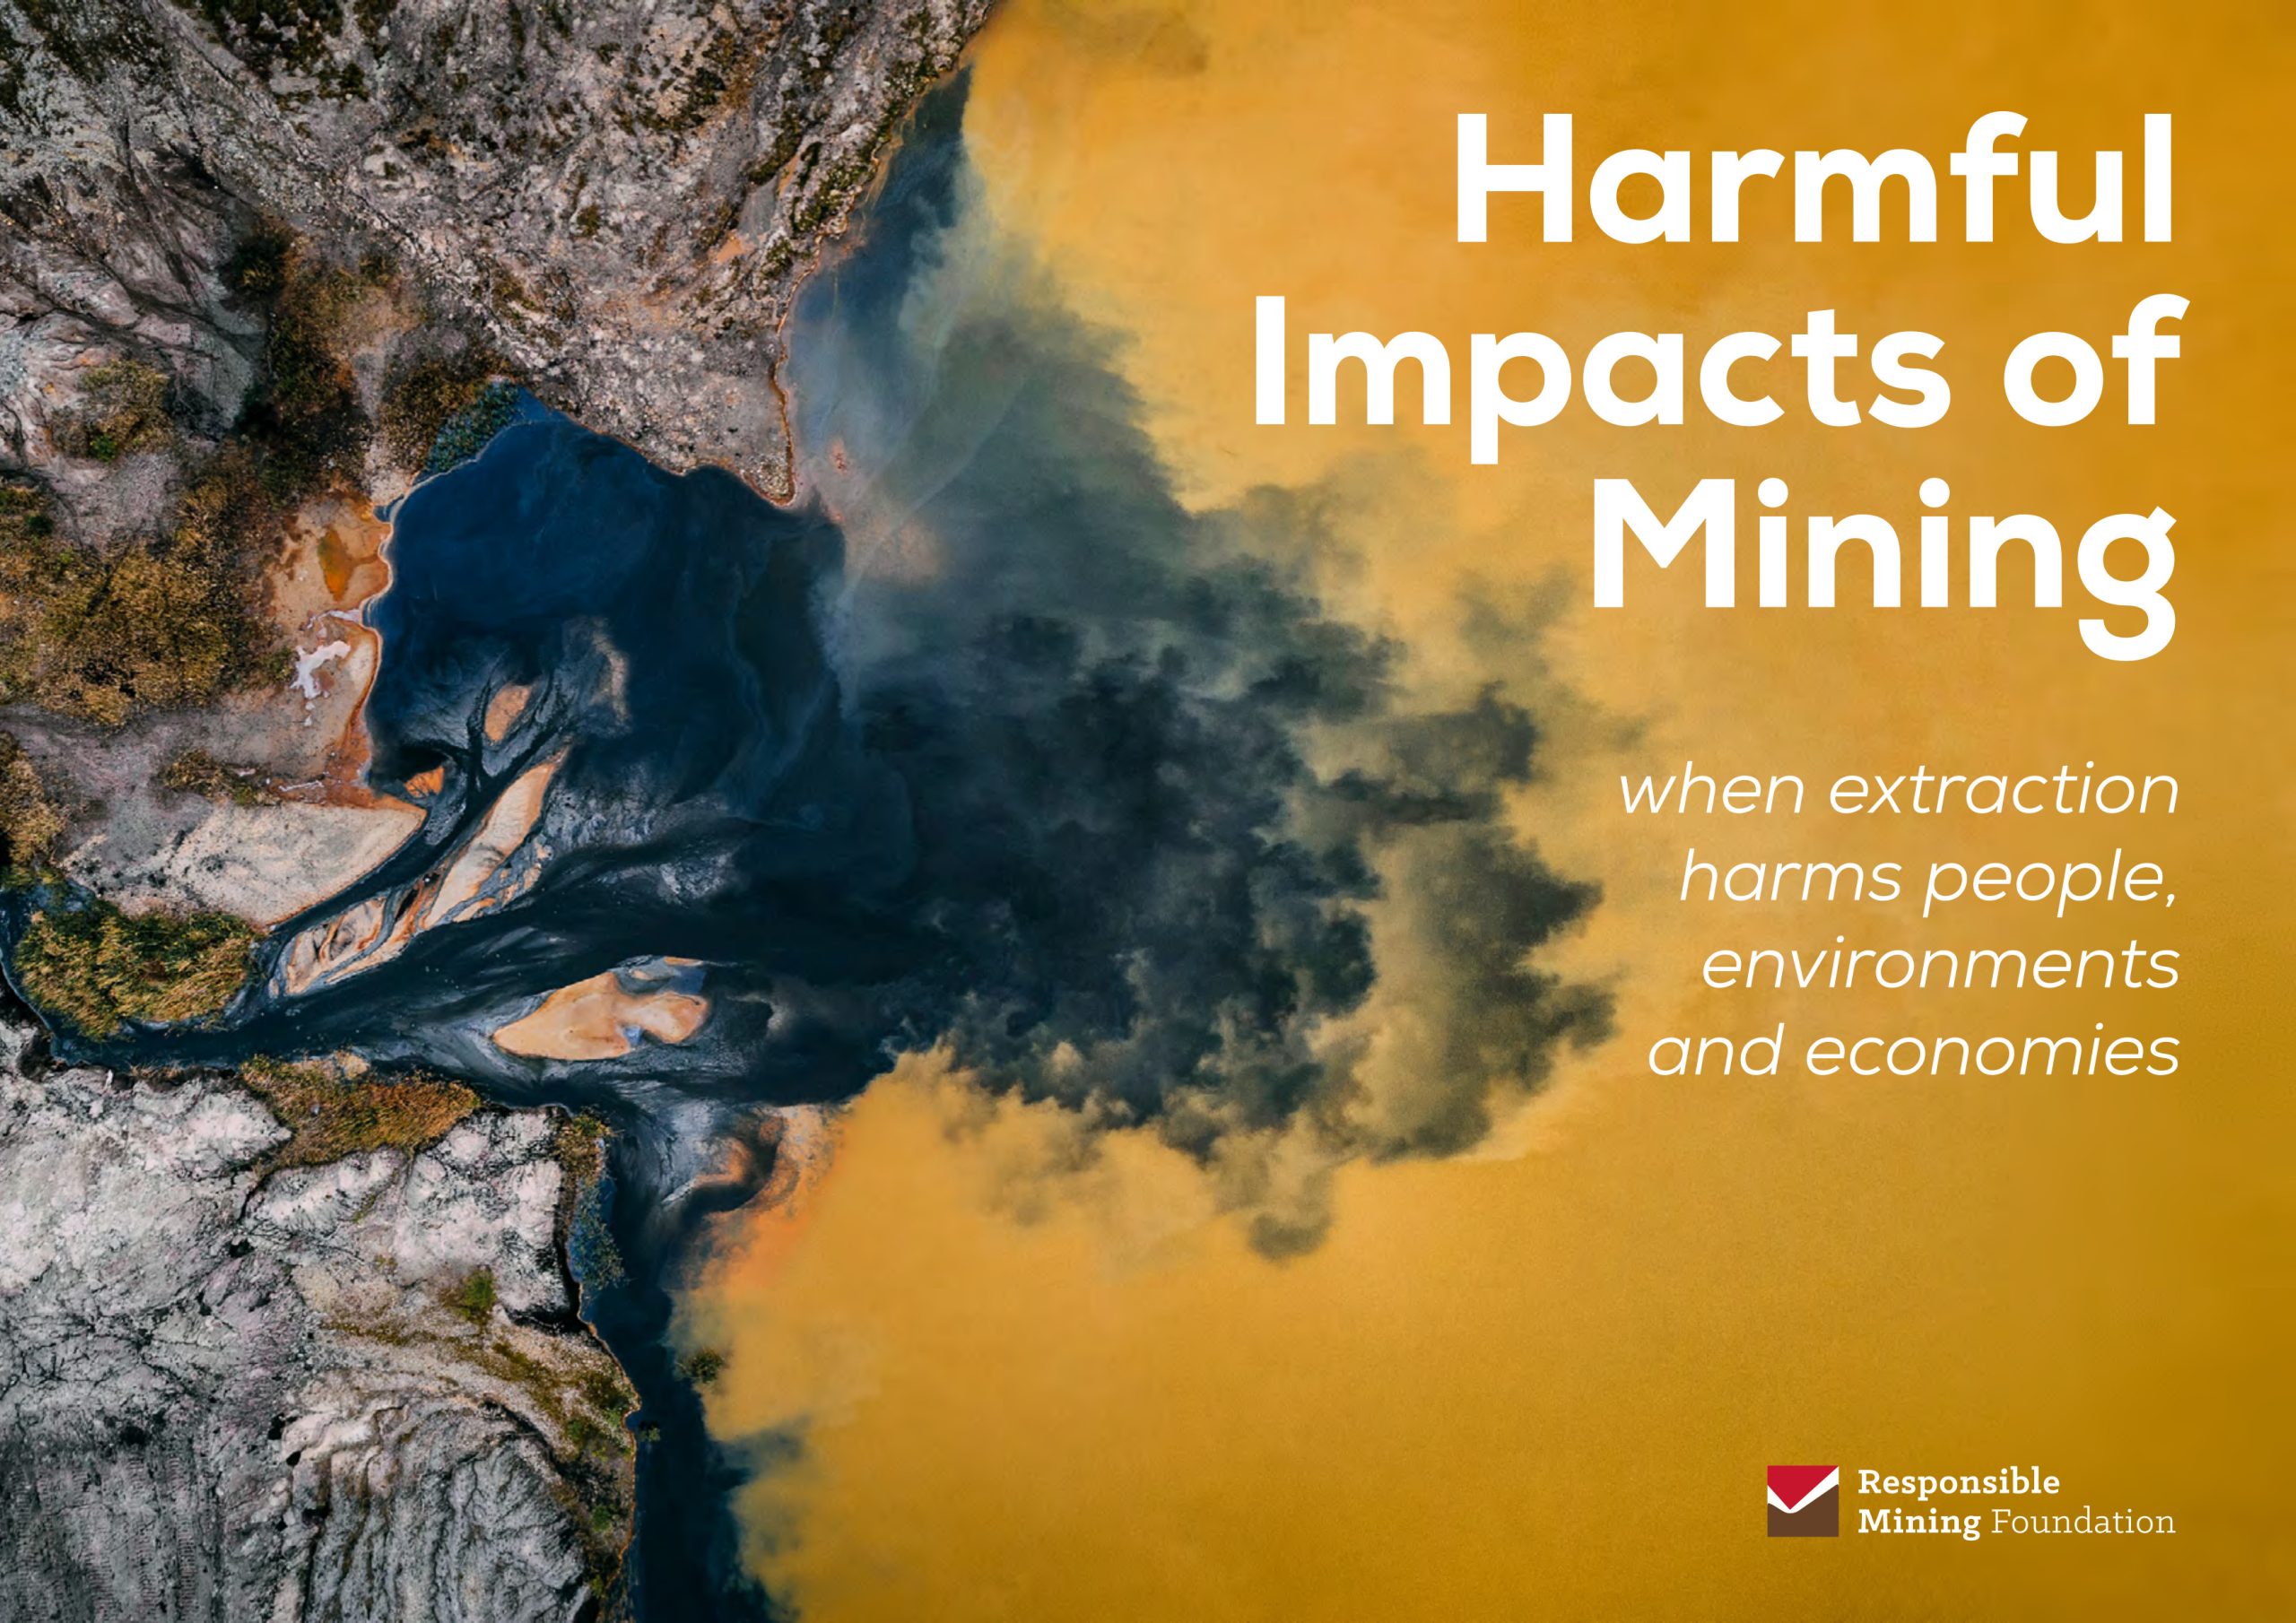 Why is mining bad for human health?